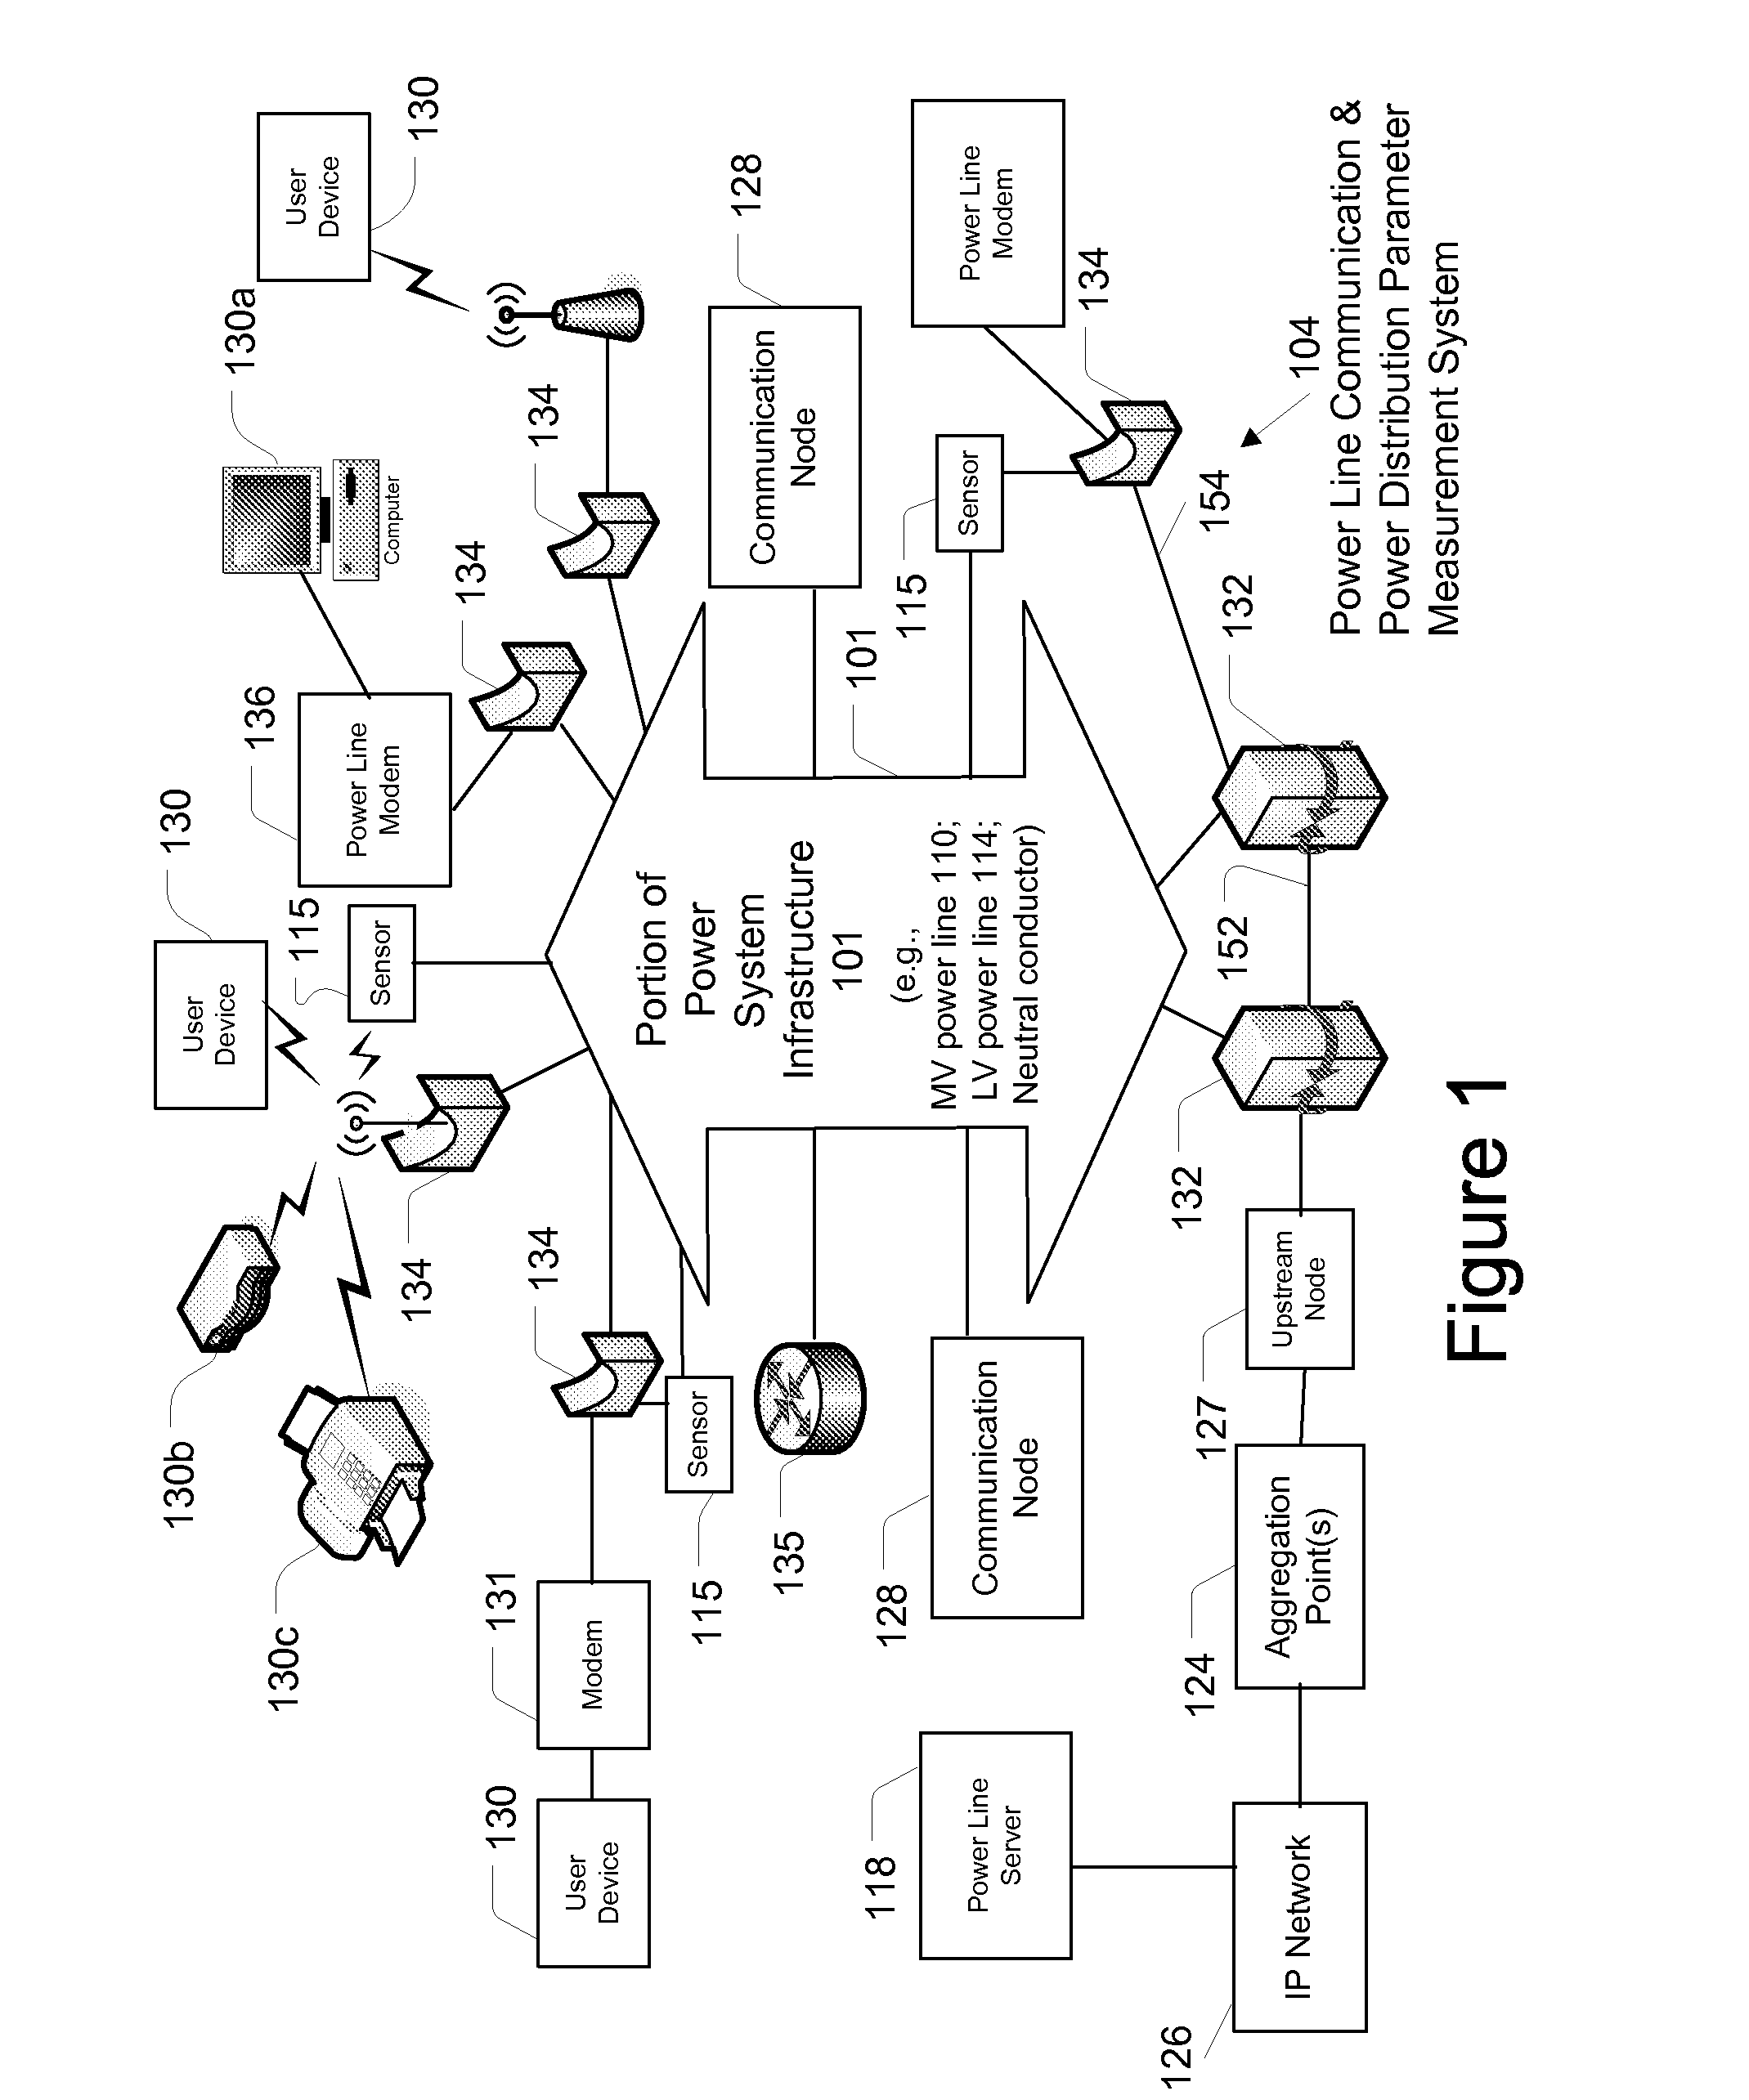 System and Method for Detecting Distribution Transformer Overload